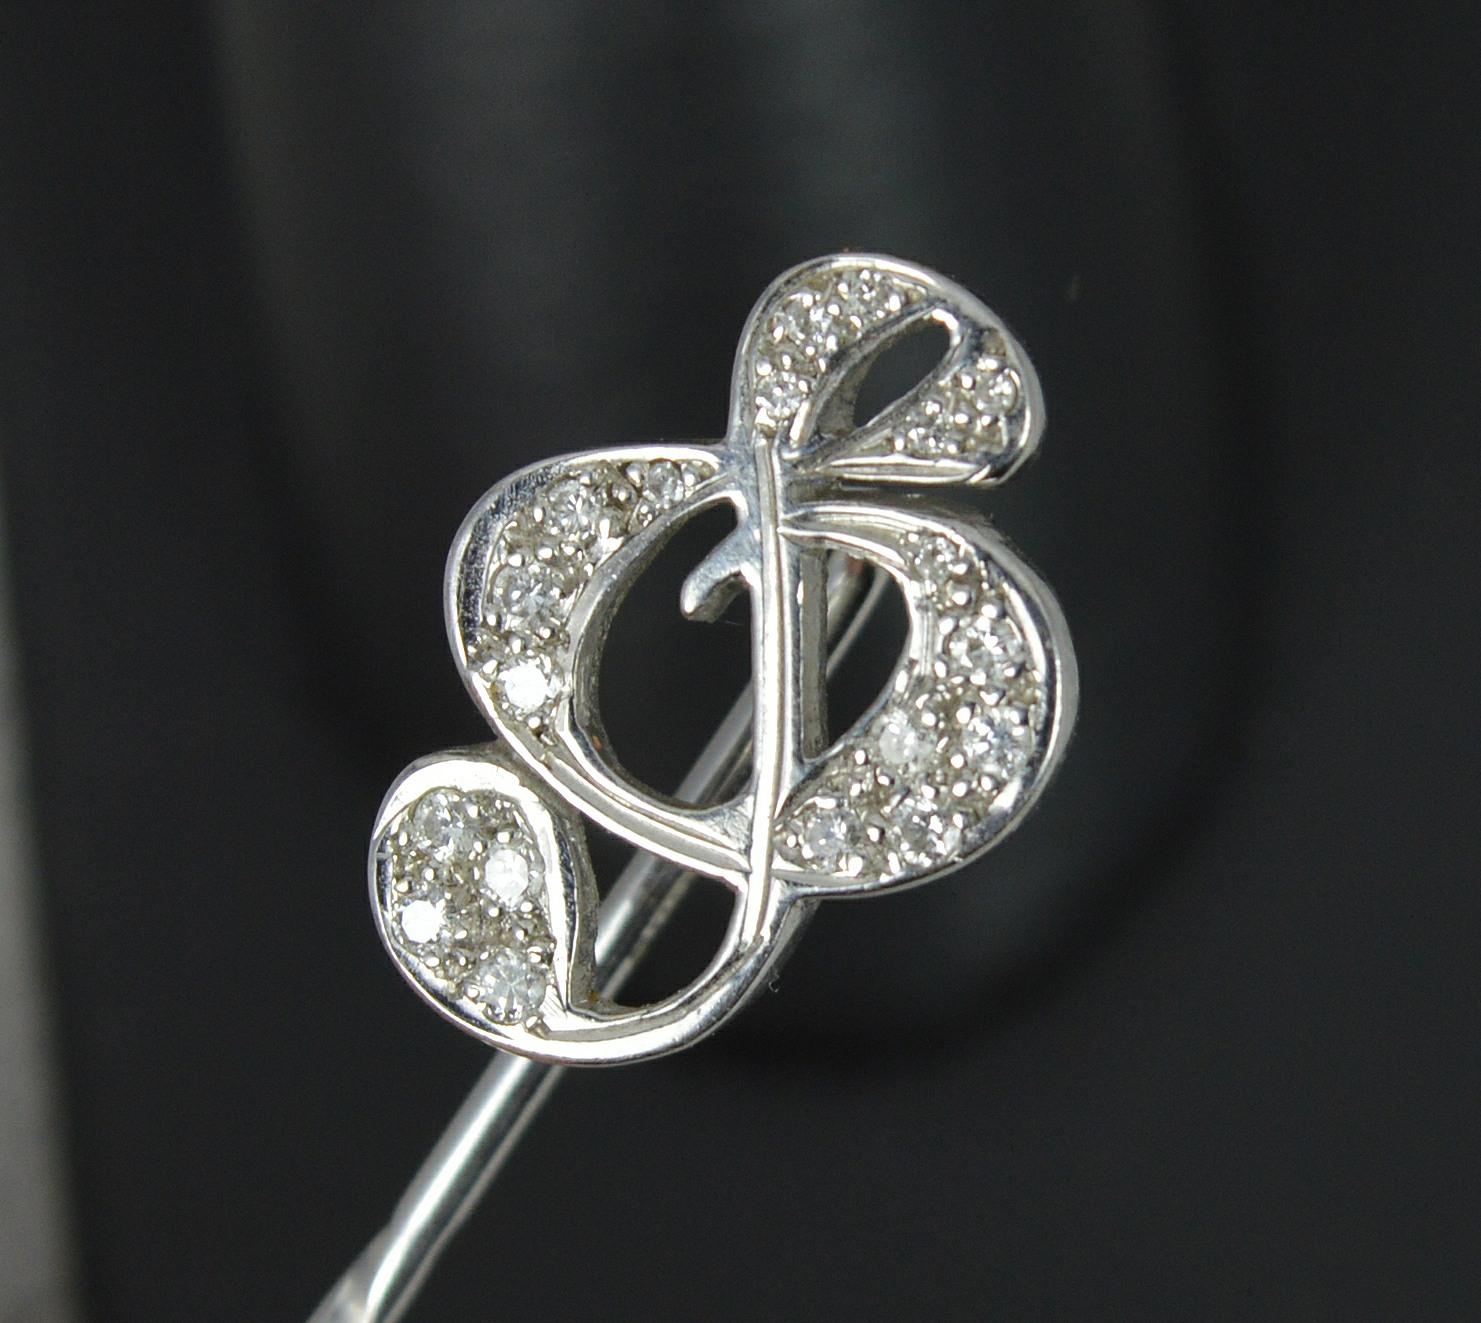 A beautiful Theo Fennell Designer stick or tie pin.
Solid 18 carat white gold example.
Designed with a musical treble clef note to the top.
Set with 18 natural round brilliant cut diamonds.

CONDITION ; Very good. Clean, solid example. Well set